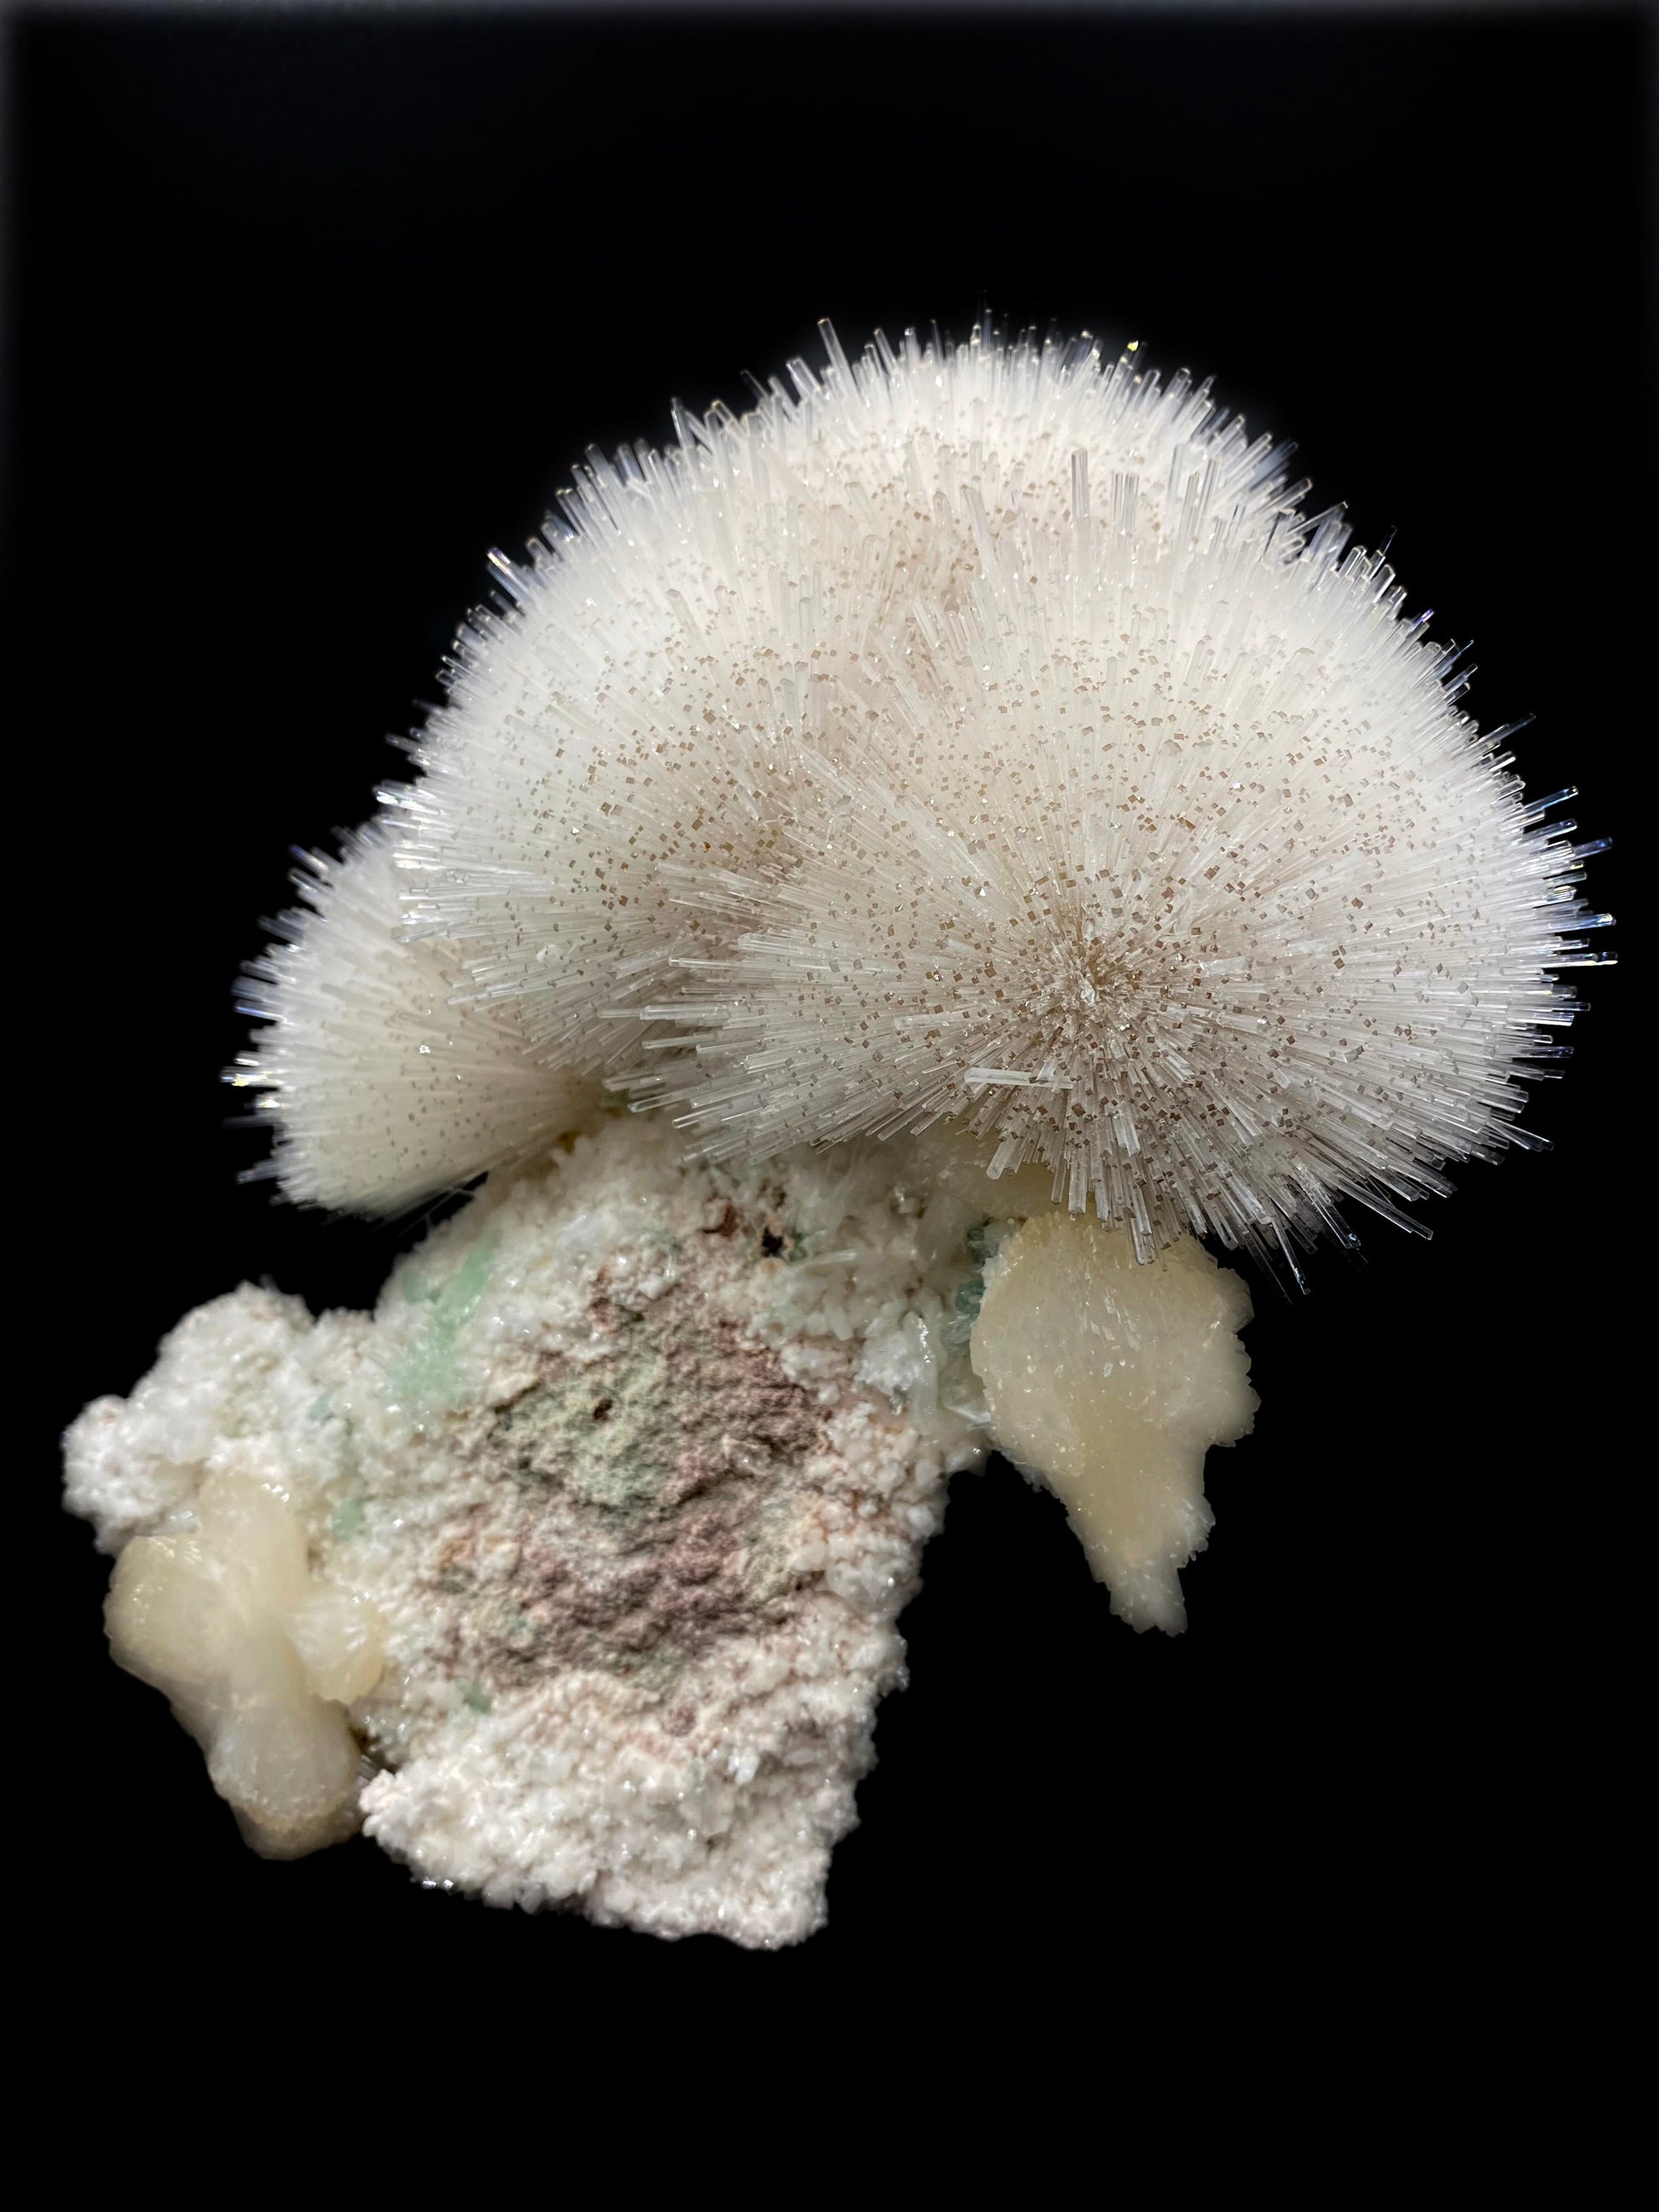 Mesolite flower formation with calcite tips, green apophyllite, and stilbite inclusions. Museum quality natural mineral specimen from Nasik, Maharashtra, India on the Deccan Plateau.